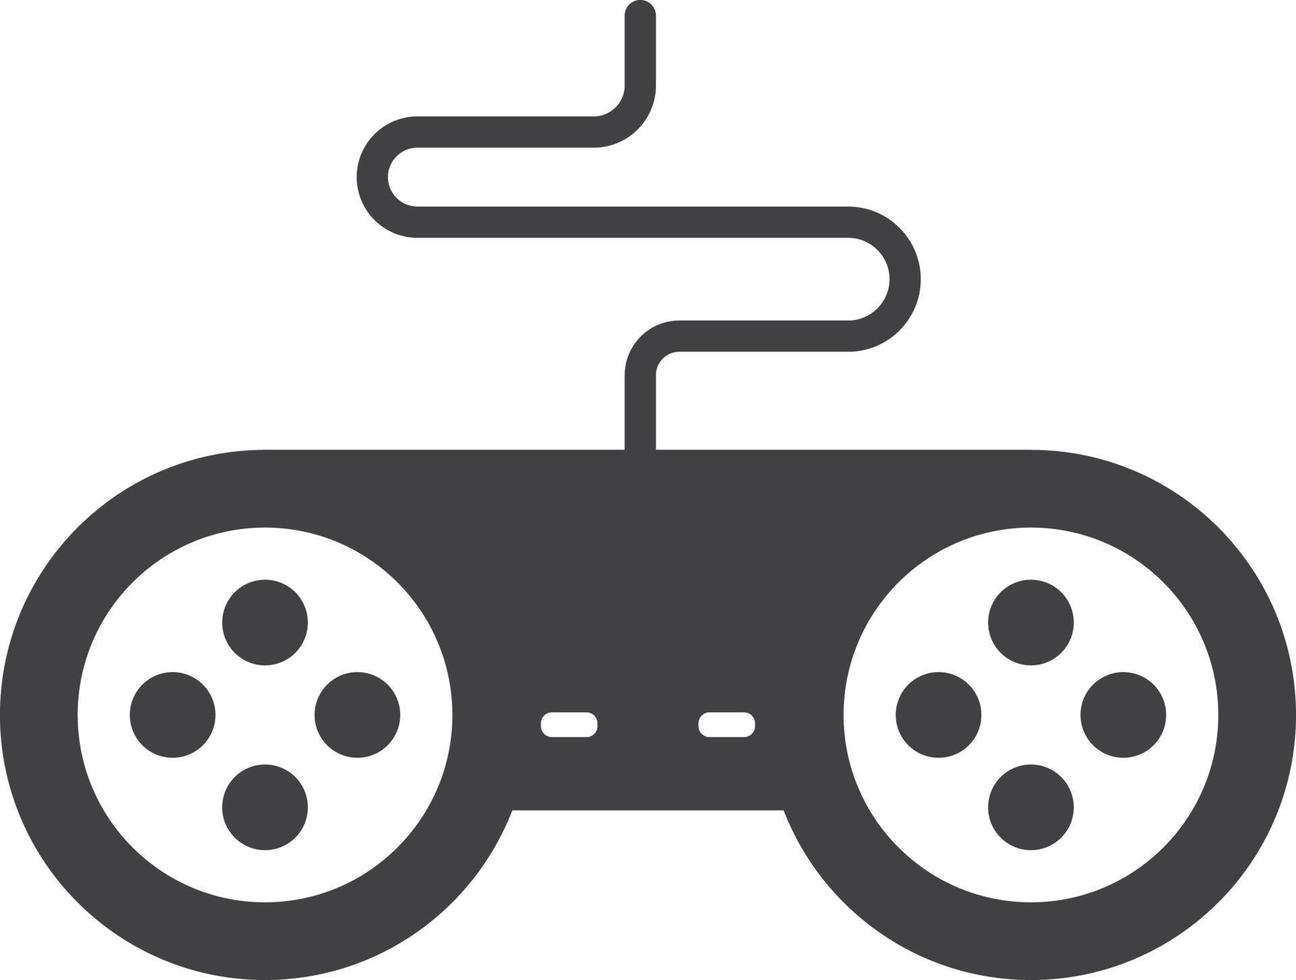 joystick for game illustration in minimal style vector